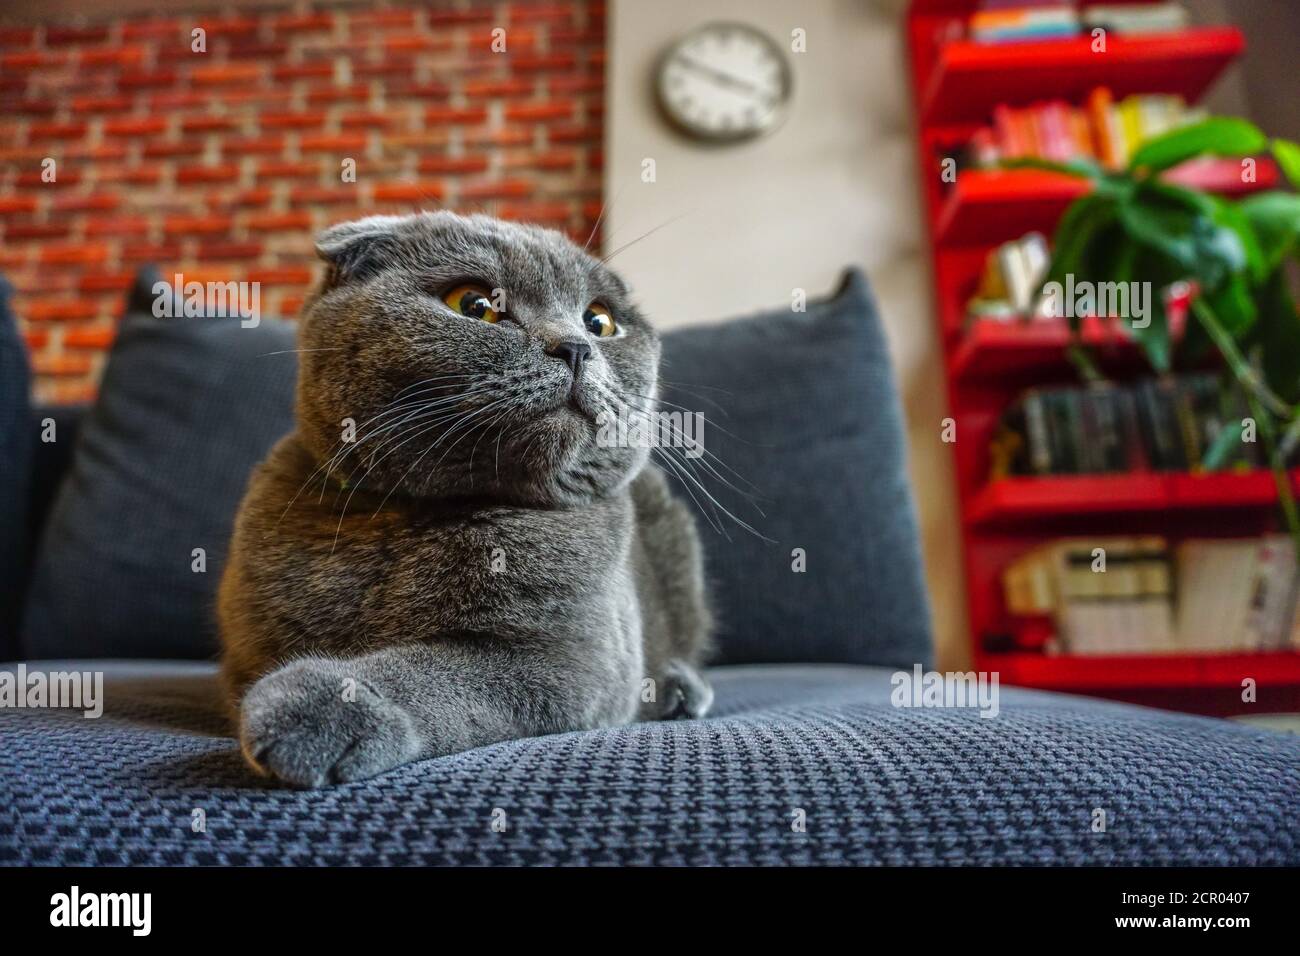 Cute scottish fold cat portrait close up view looking at camera Stock Photo